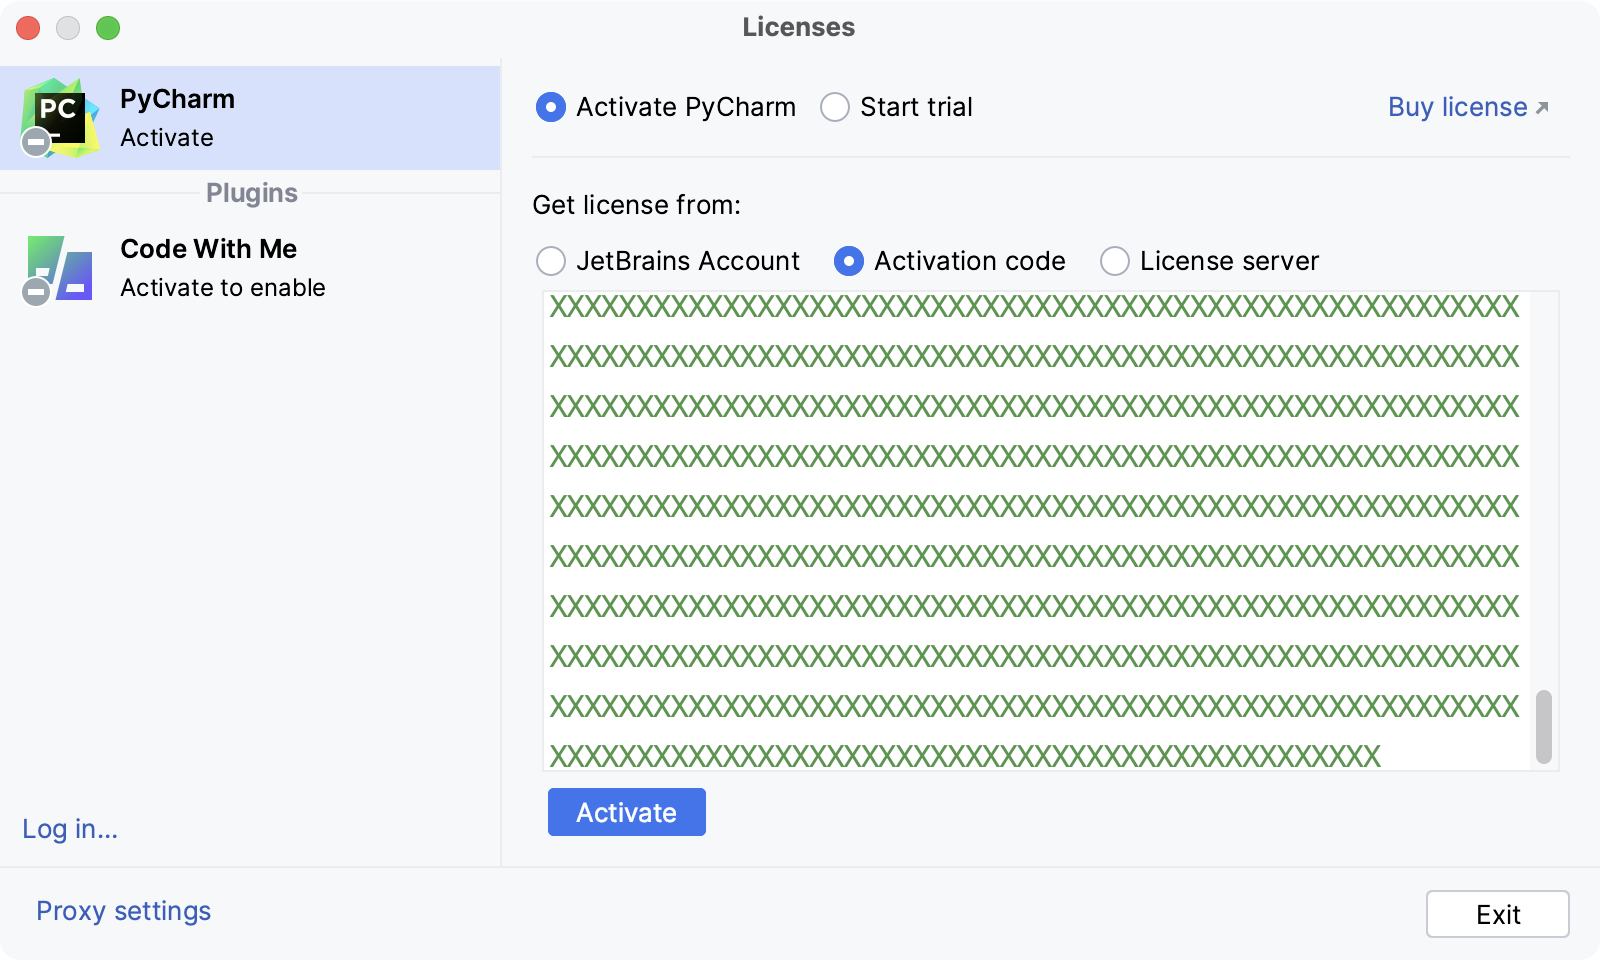 Activate PyCharm license with an activation code